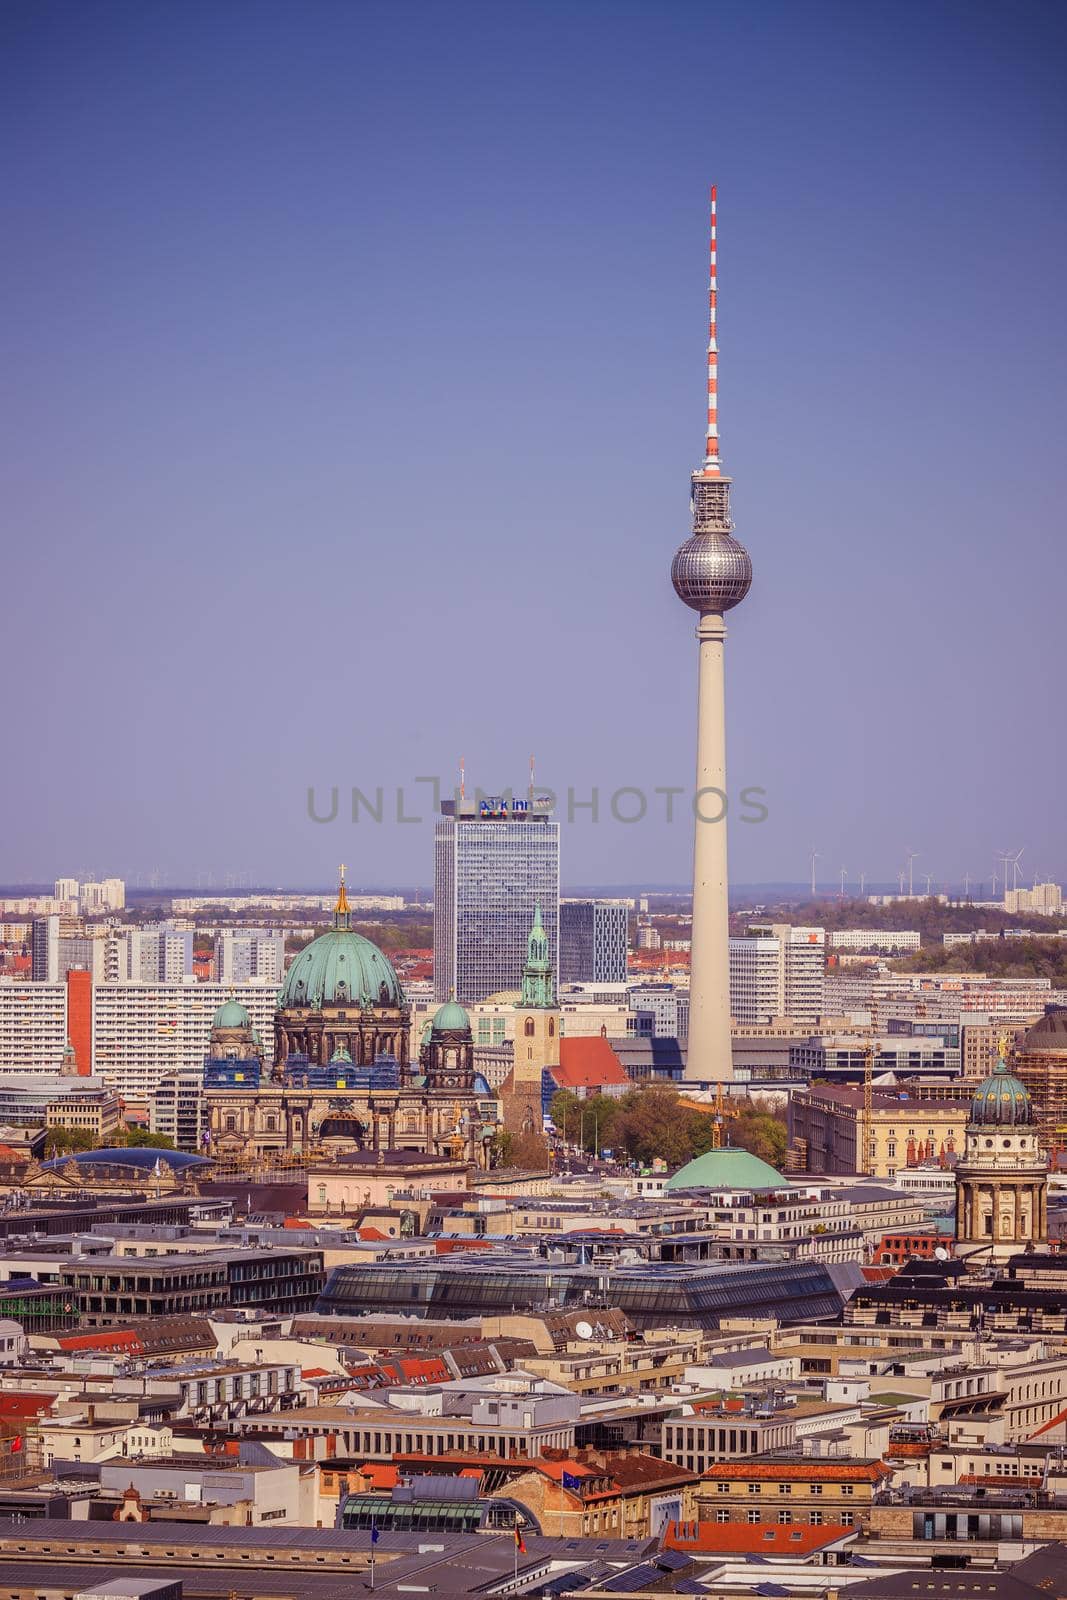 Berlin skyline with cathedral and TV tower, Germany by Daxenbichler